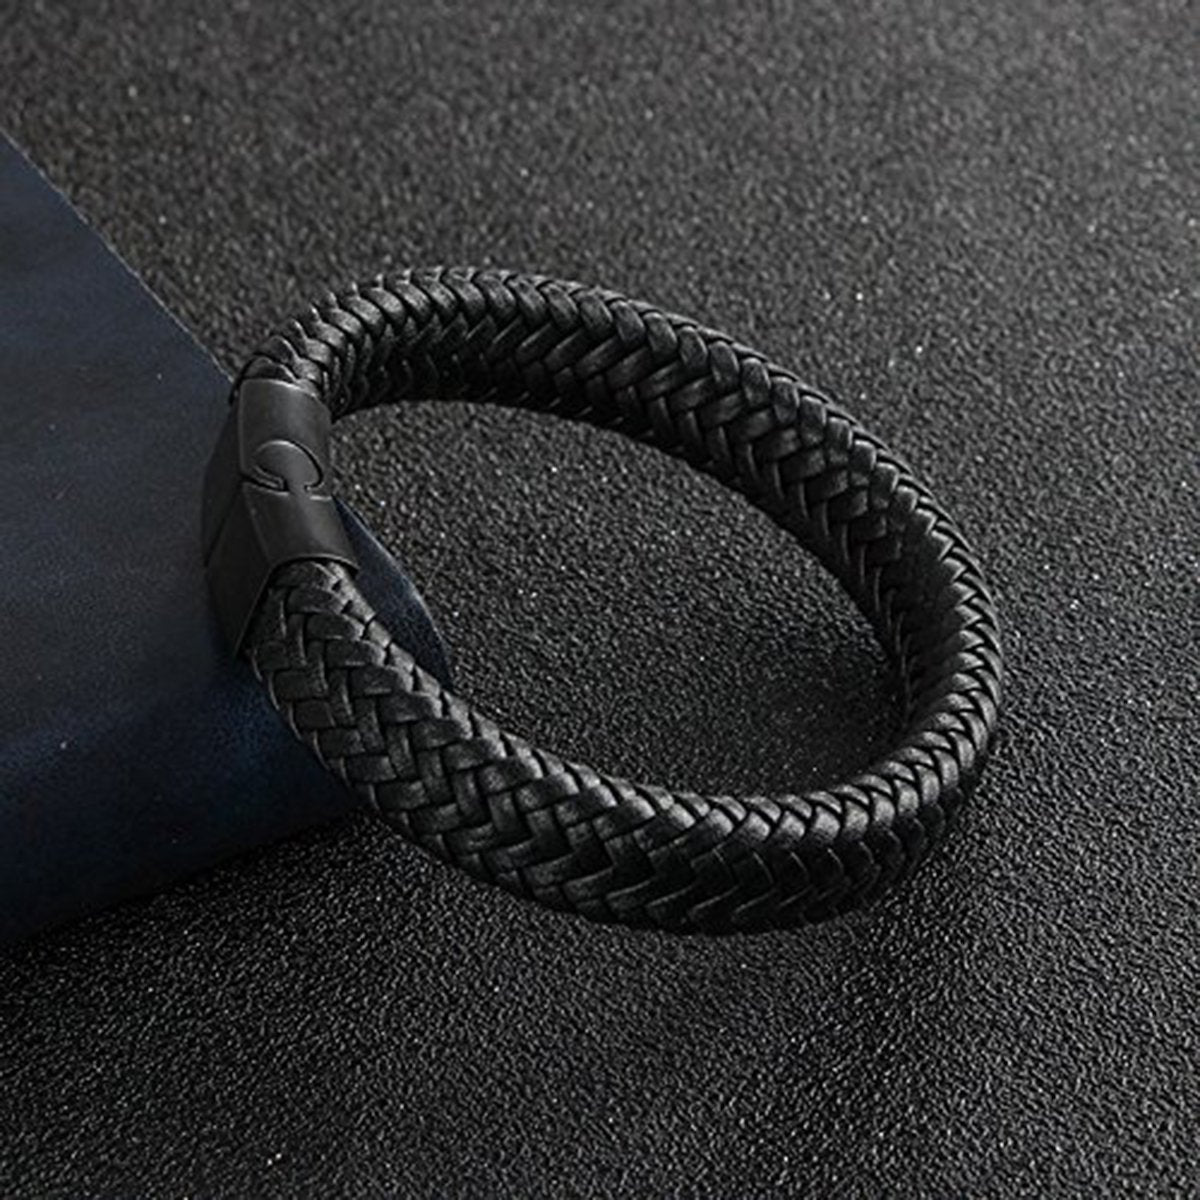 Bracelet with Matt black magnetic clasp and RX09 cable